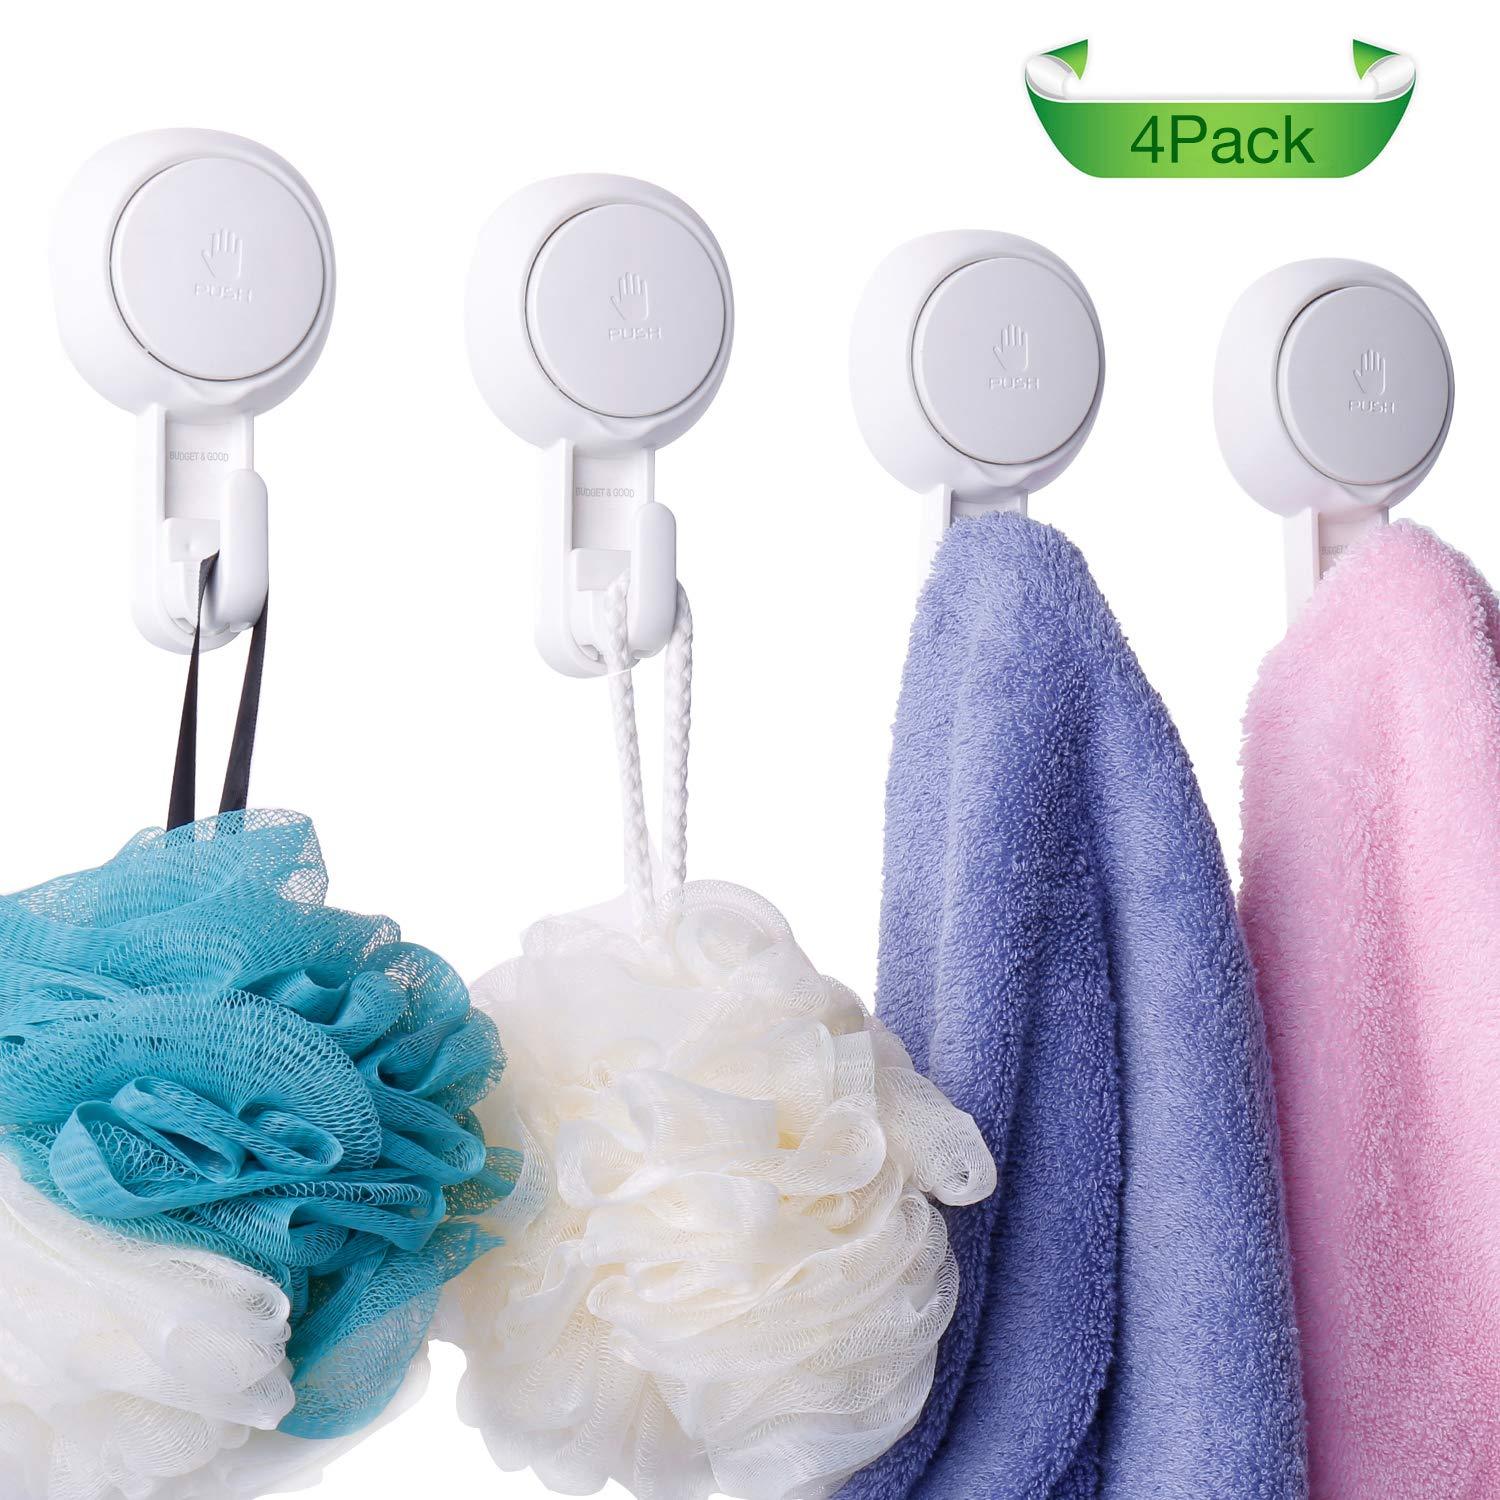 Budget & Good Powerful Suction Cup Utility Hooks 4 Pack, Heavy Duty Vacuum Shower Hooks Suction for Bathroom No Damage Dorm Wall Hanger Plastic Windows Hooks Suction Cup Waterproof Reusable